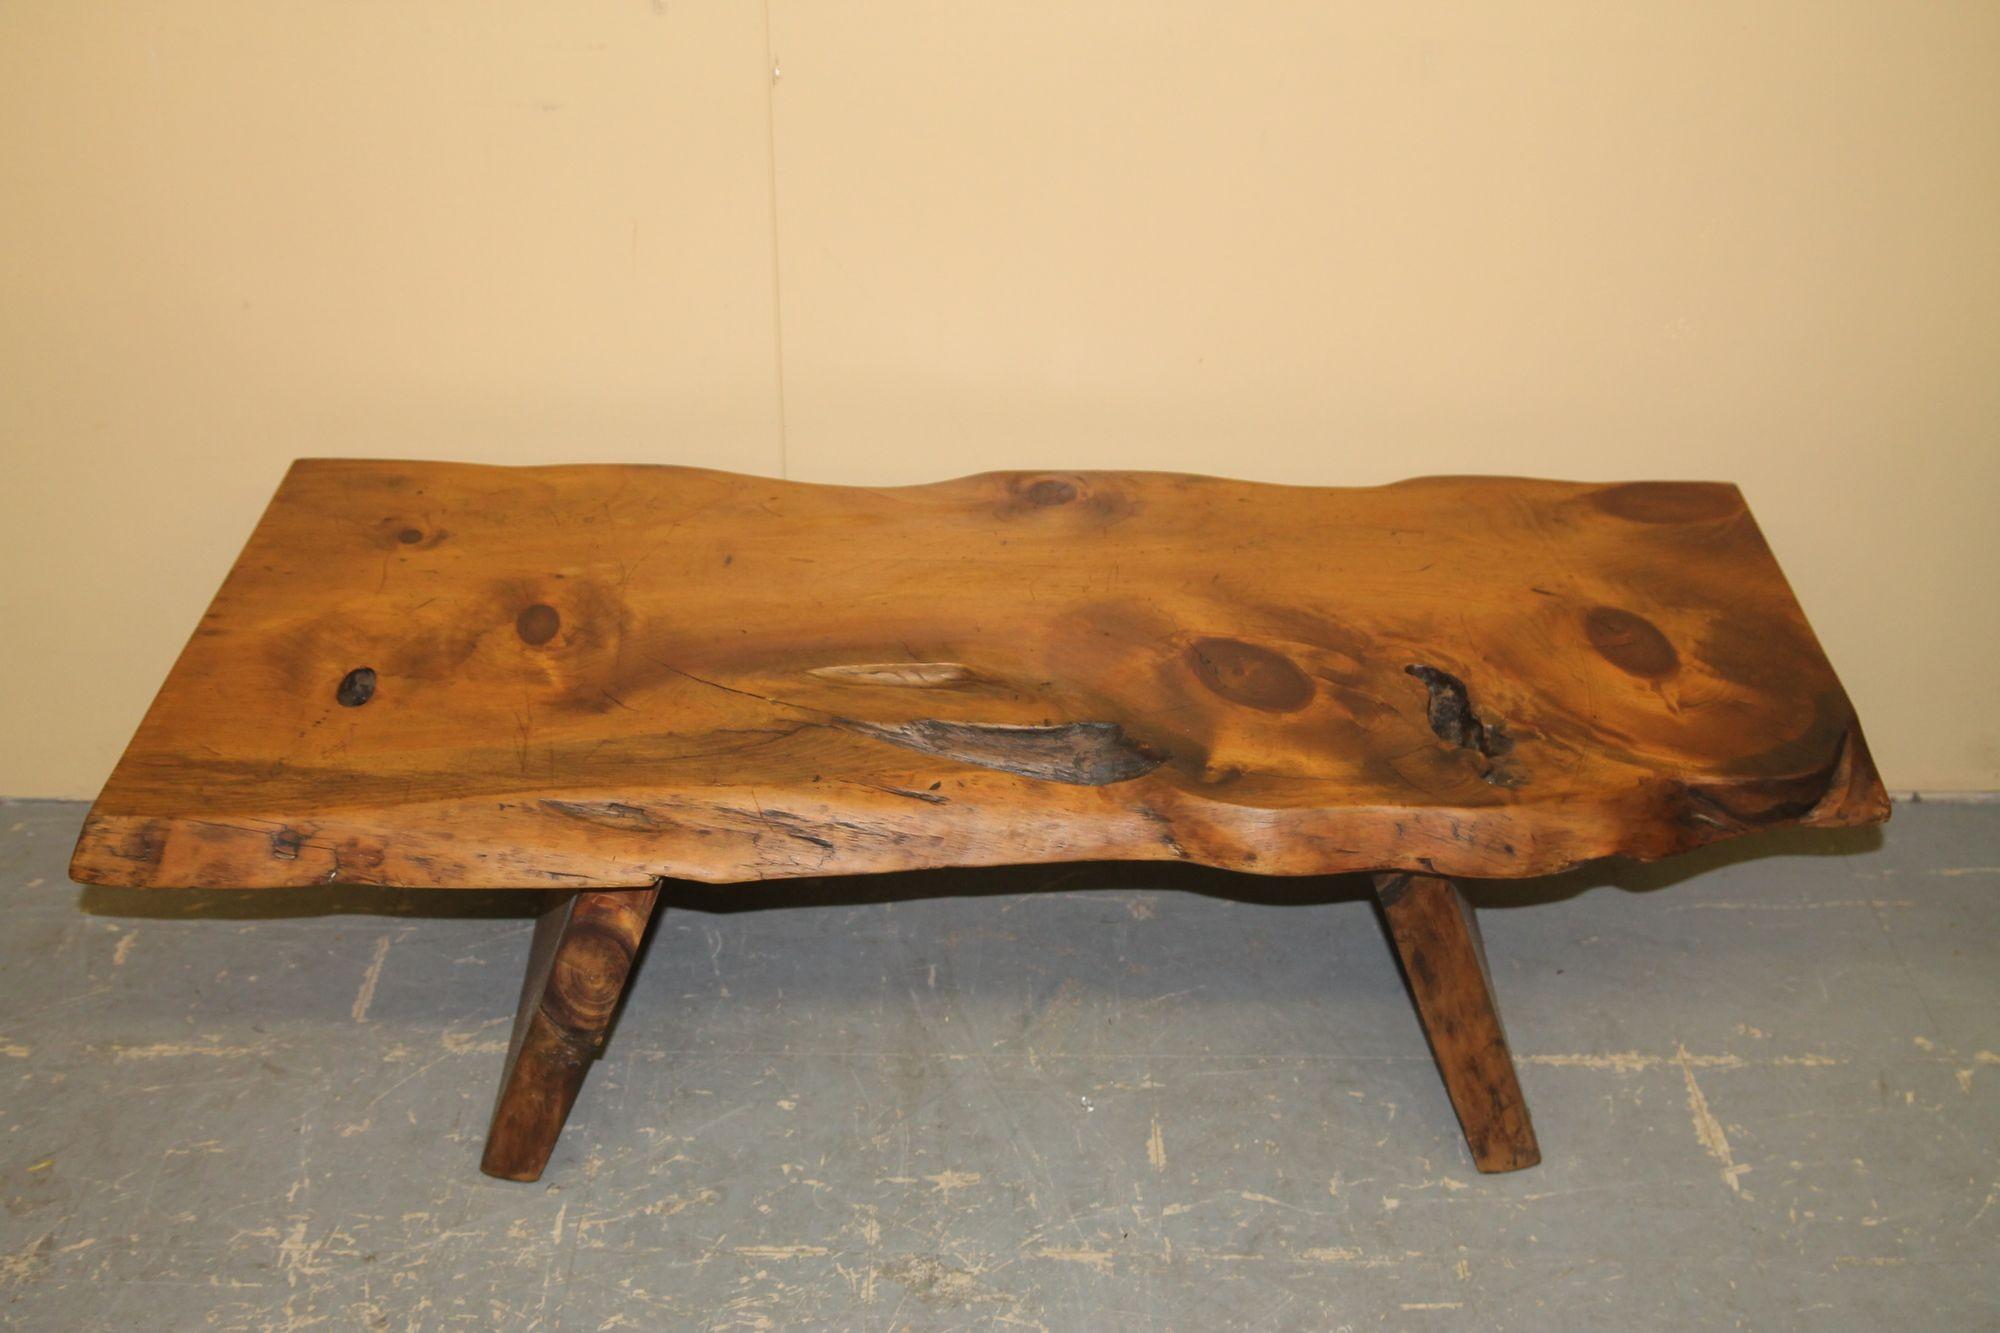 Pleased to offer this great live edge coffee table. This table was made by a NJ wood worker. This will look great in any setting.